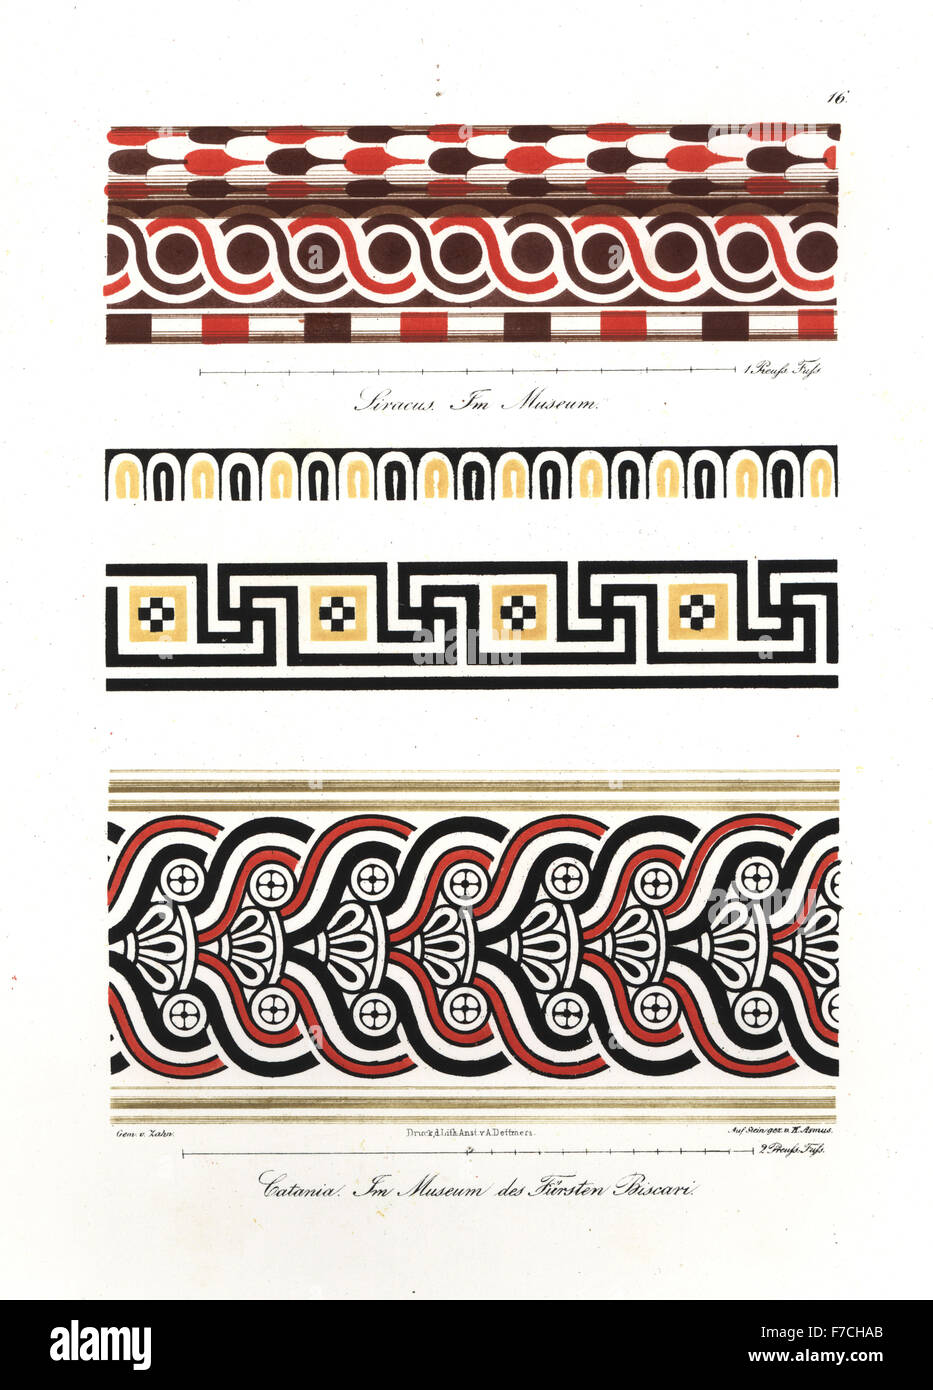 Wall paintings from Museo Biscari, Catania, and cornice from Syracuse Museum, Italy, 17th century. Handcoloured lithograph by Berth after an illustration by Wilhelm Zahn from his Ornament of All Classical Art Eras, Ornamente aller klassischen Kunst-Epochen, Reimer, Berlin, 1832. Stock Photo